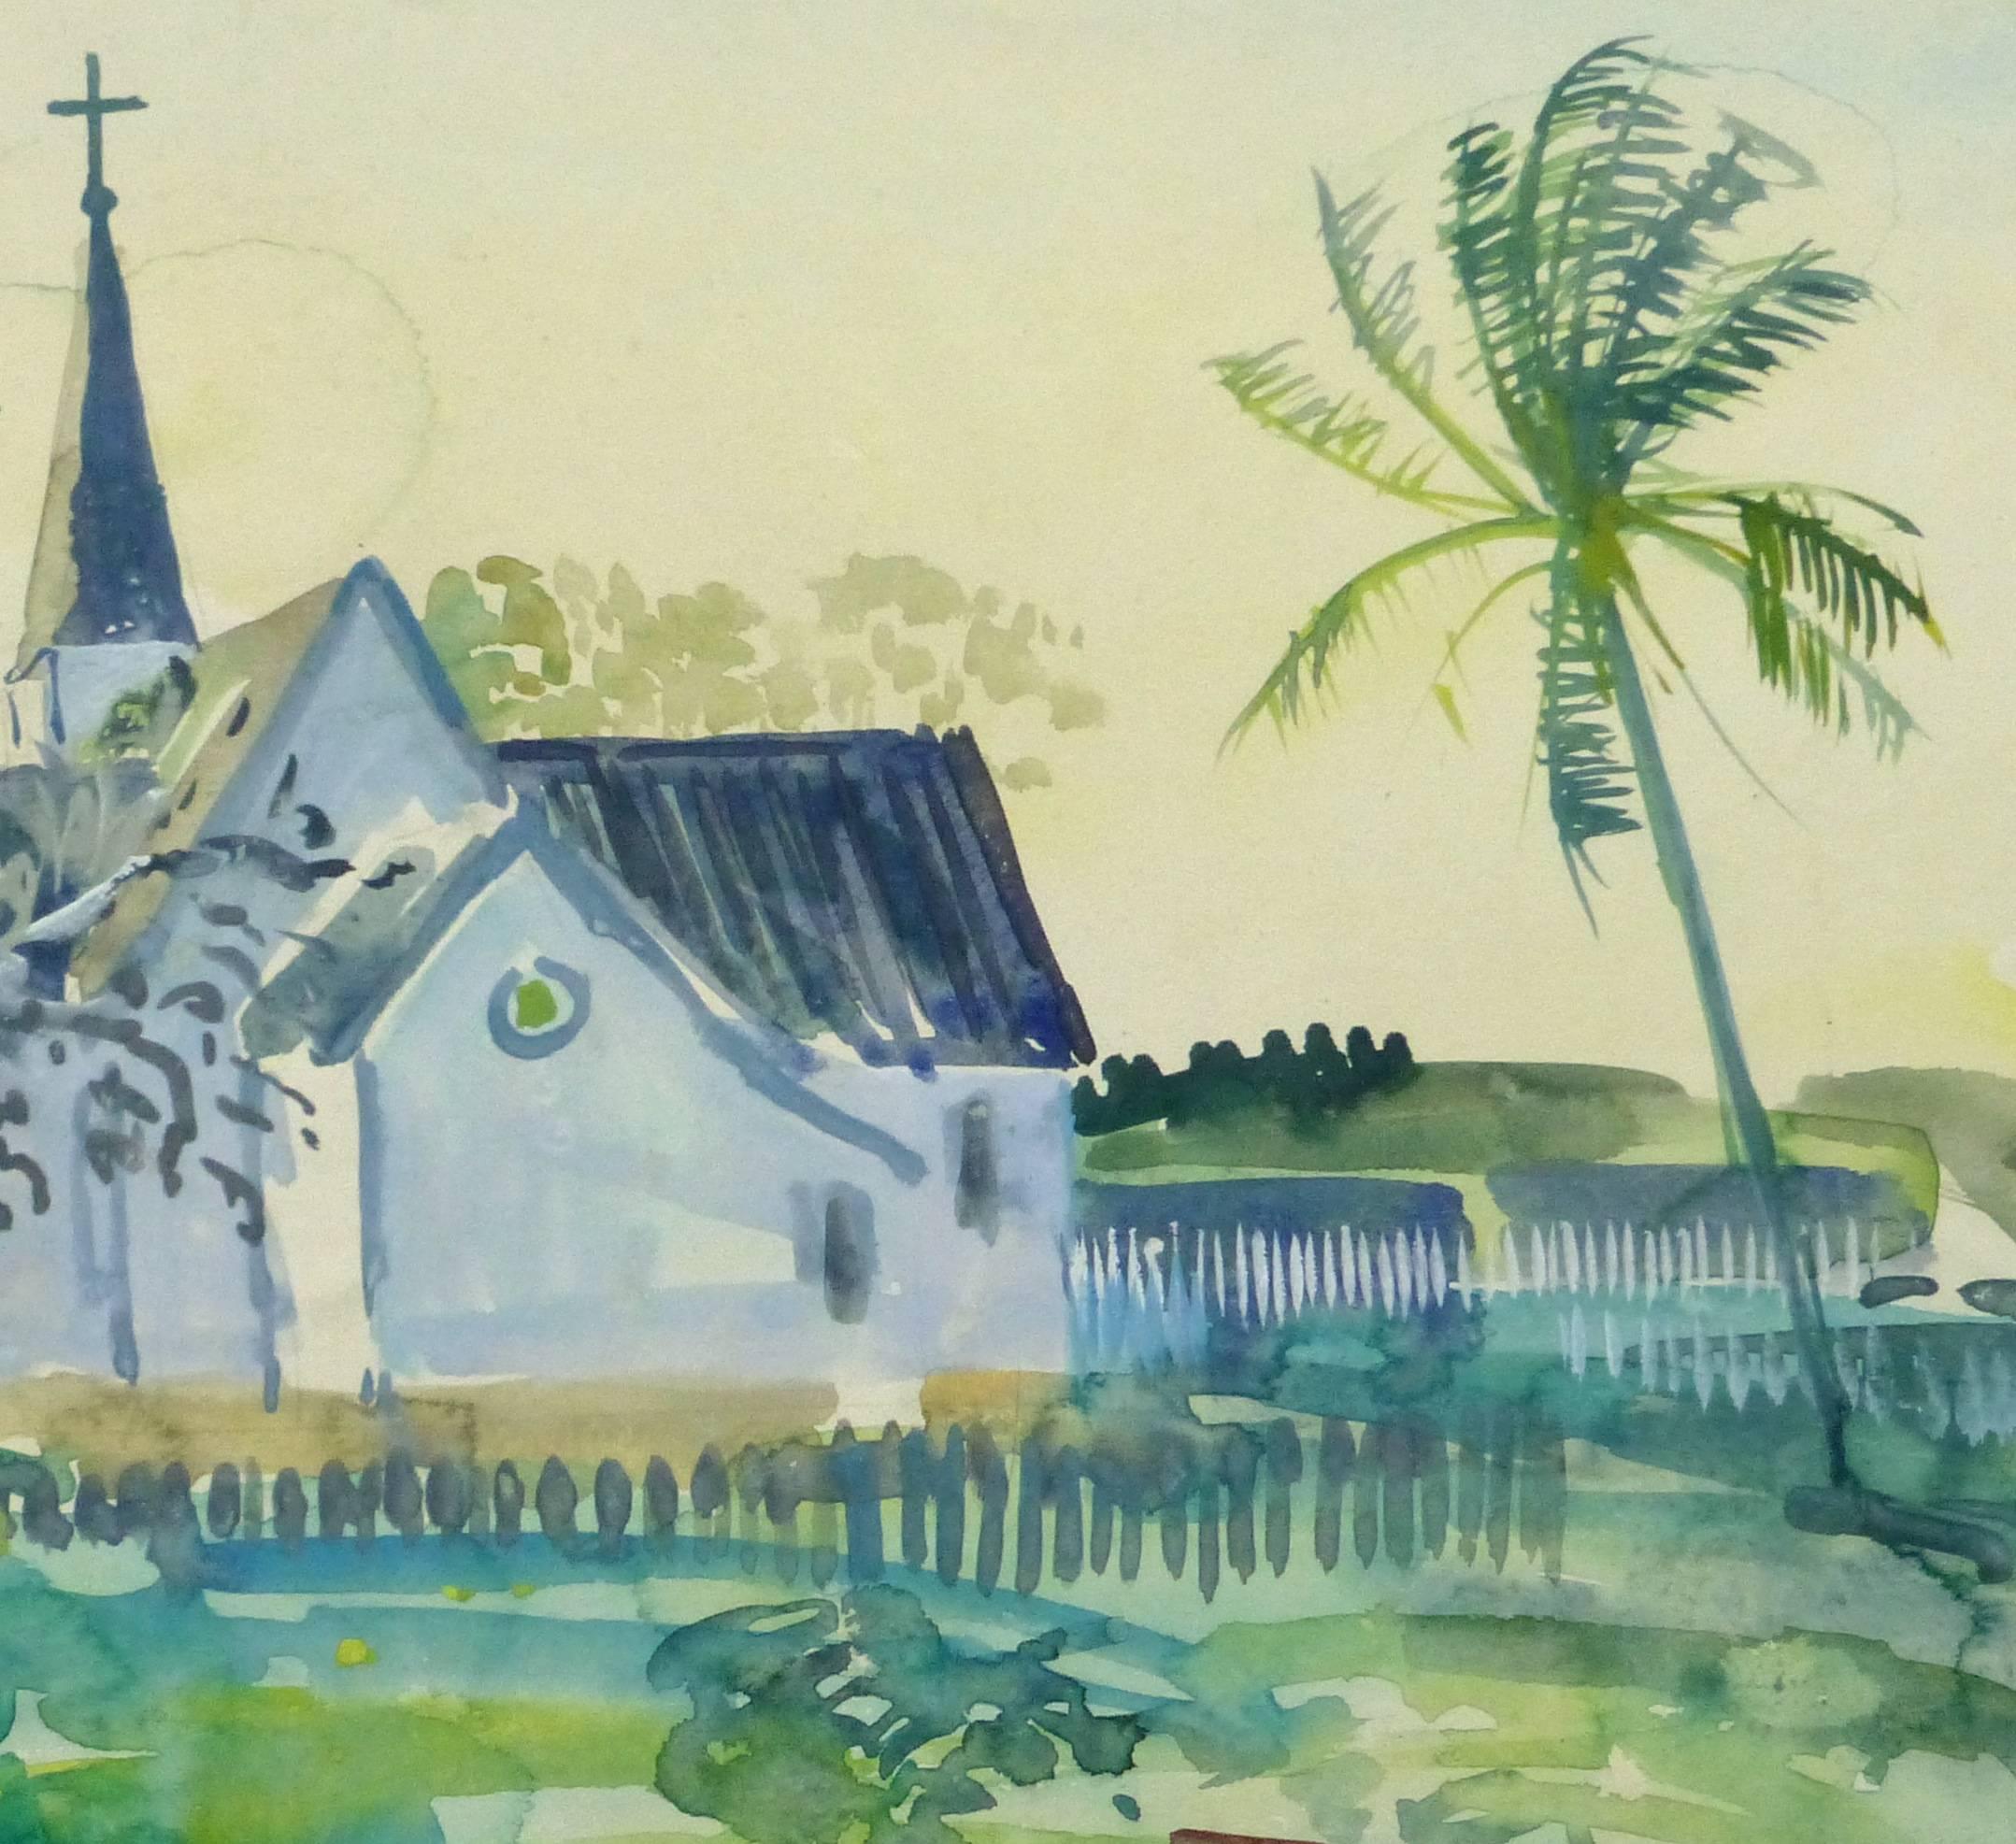 Delightful watercolor landscape of a small and charming church surrounded by bright tropical foliage by Stephane Magnard, circa 1950.

Original one-of-a-kind artwork on paper displayed on a white mat with a gold border. Mat fits a standard-size